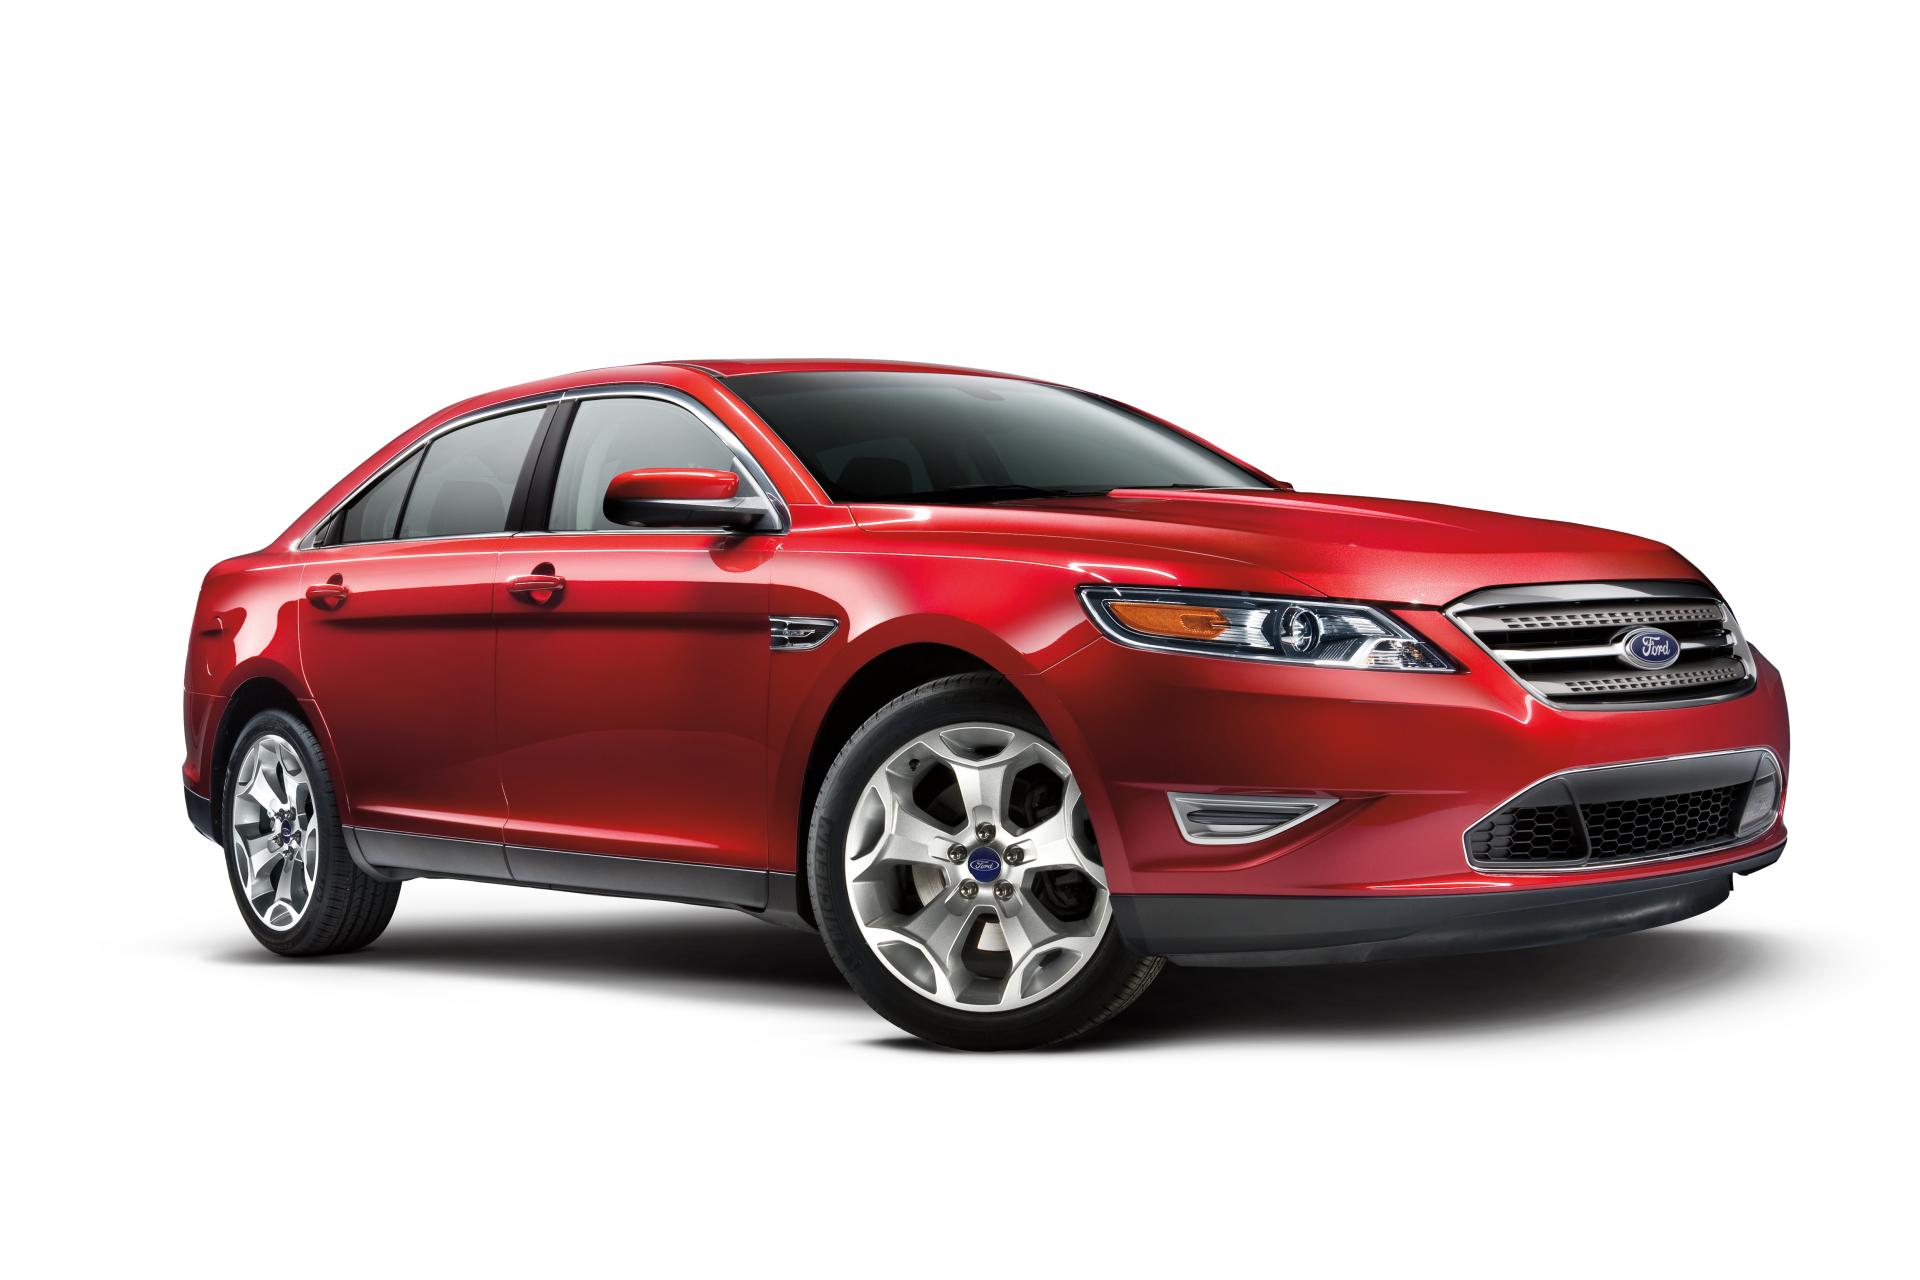 2012 Ford Taurus SHO News and Information